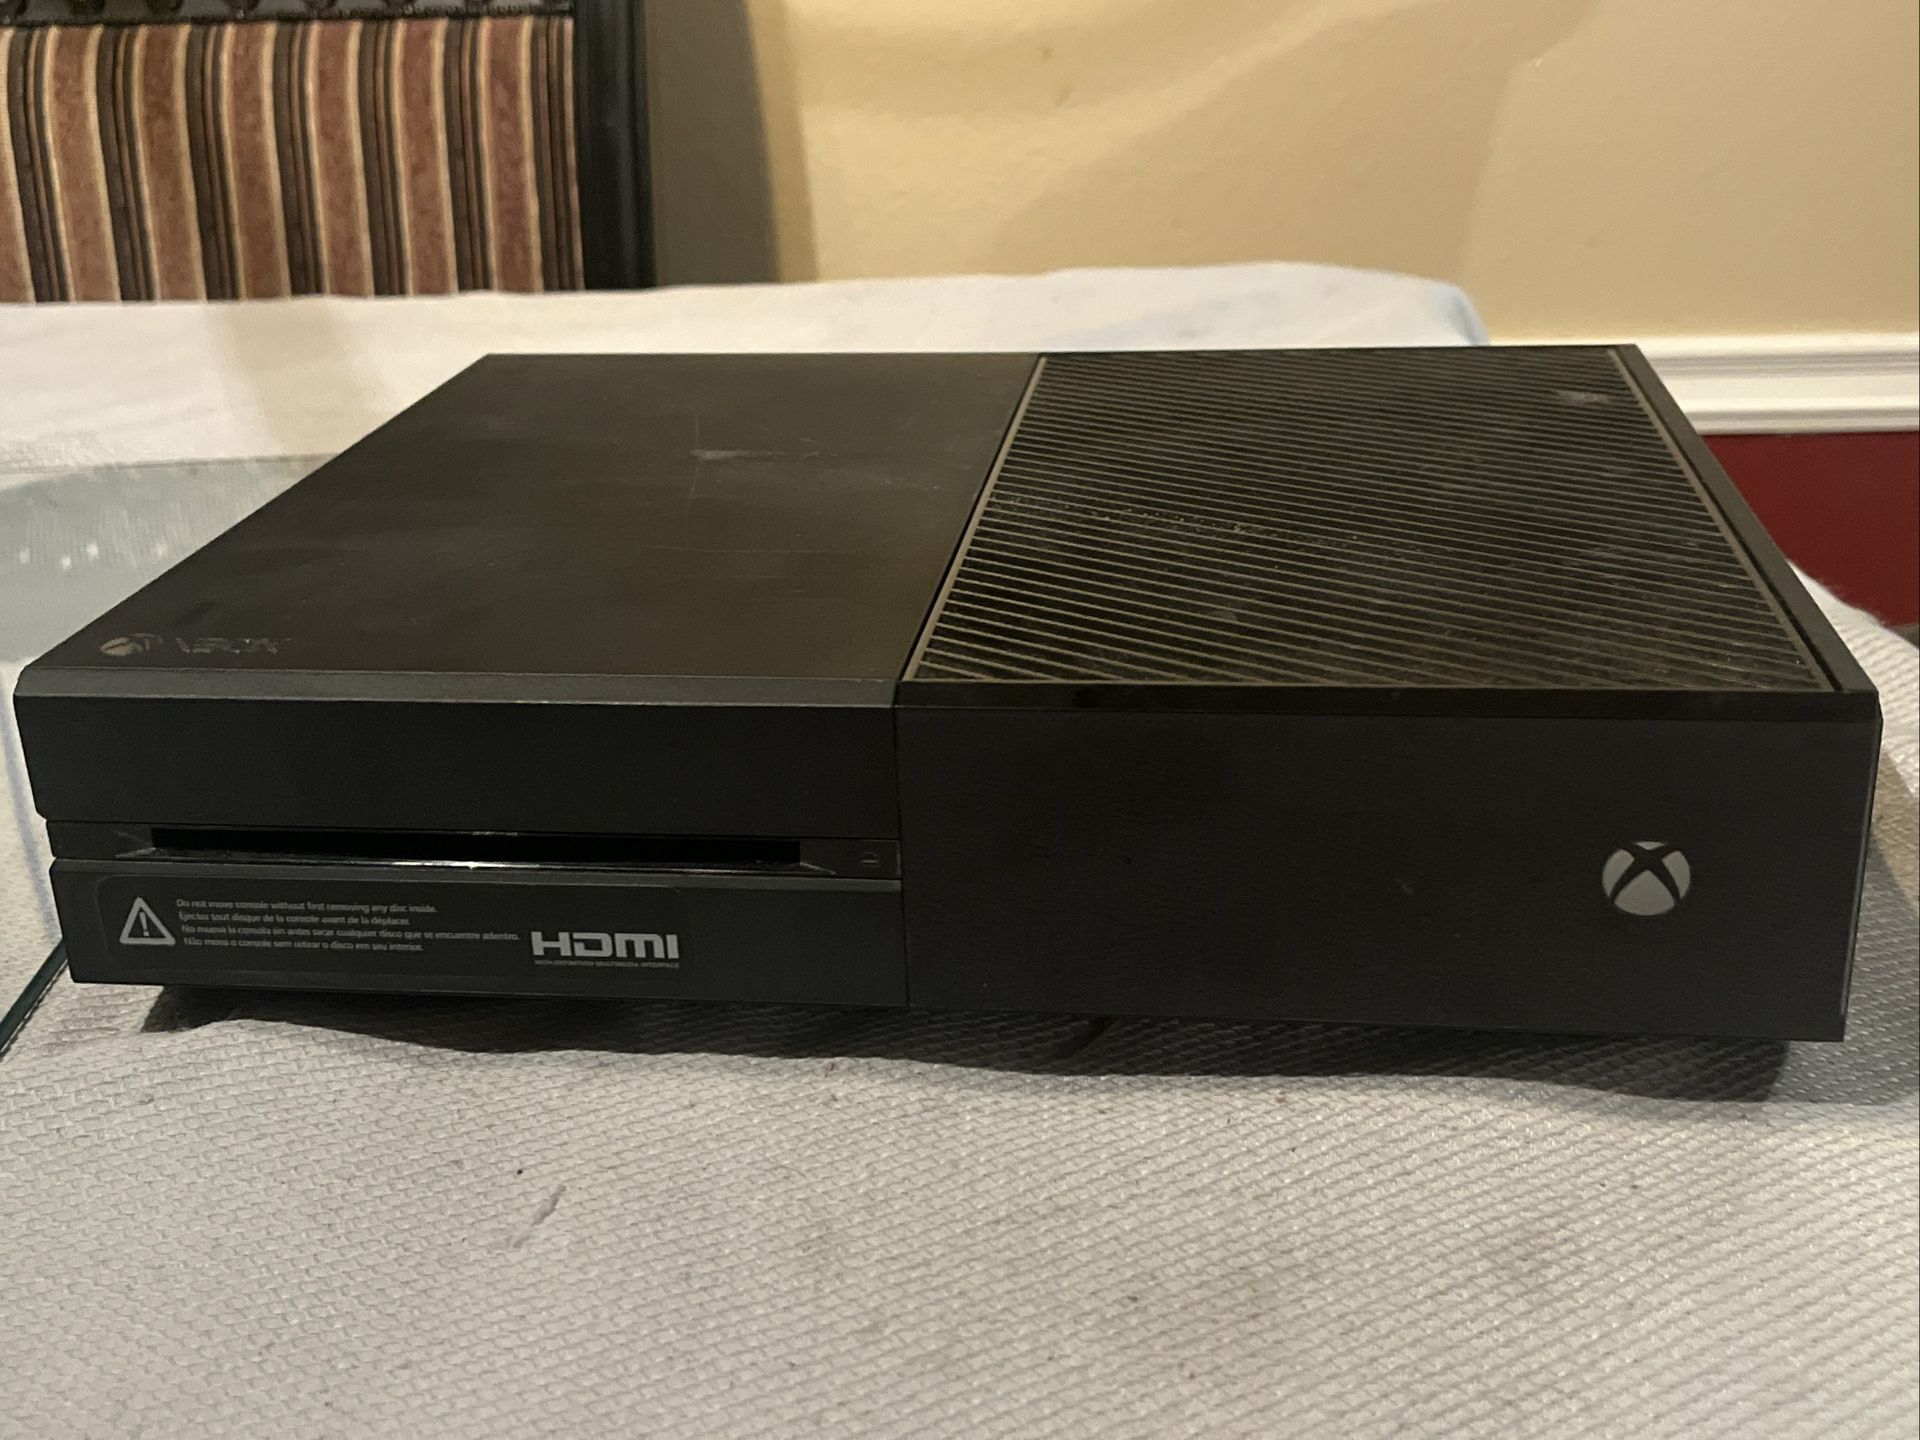 Microsoft Xbox One 500GB Home Console - Black (1540) Console Only (HDMI Problem)